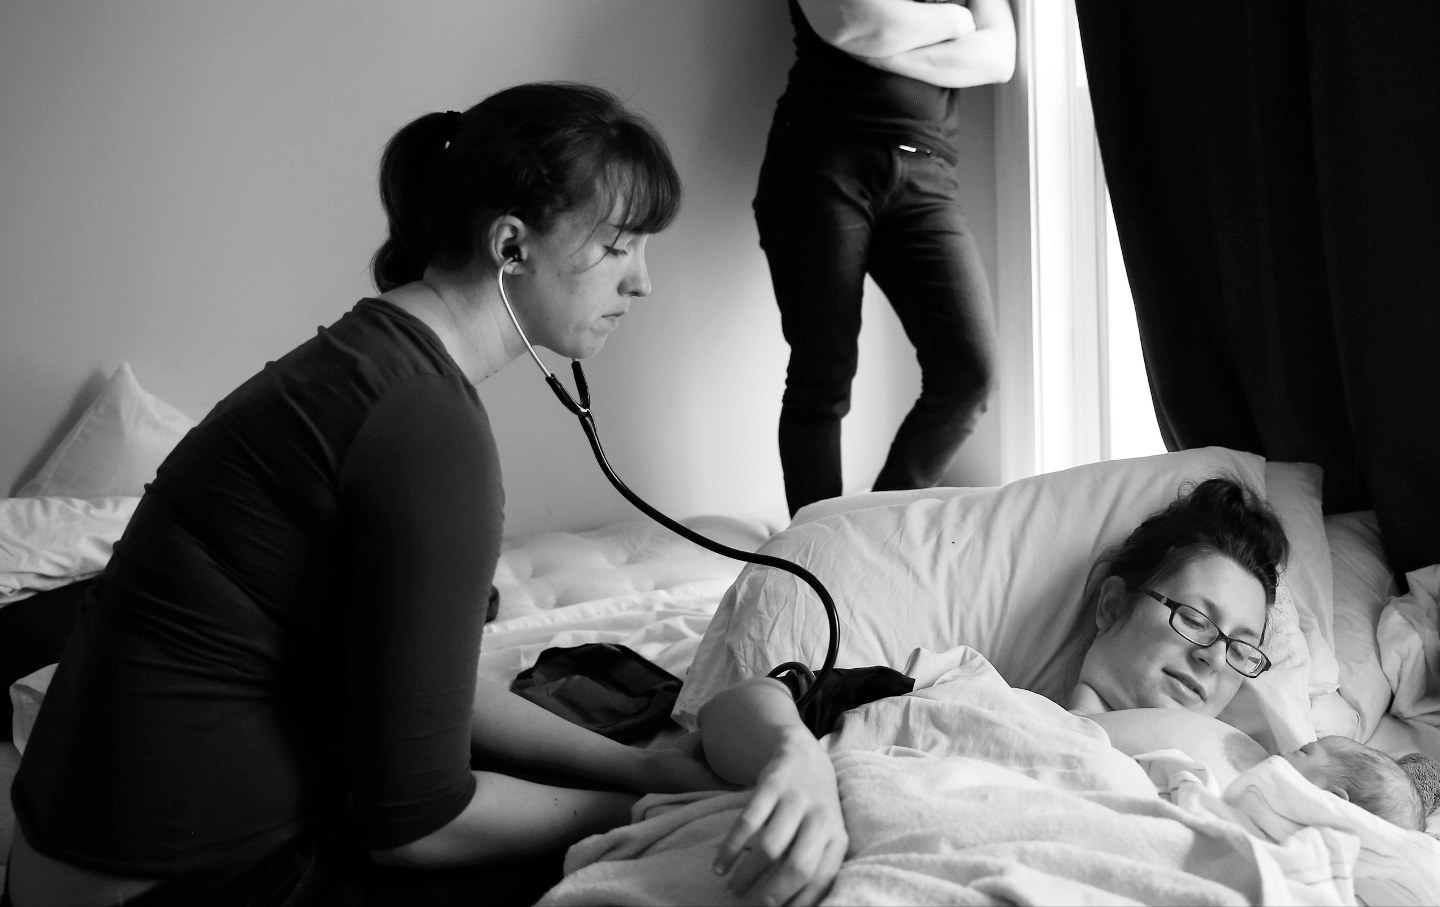 A student midwife taking a mother's blood pressure.